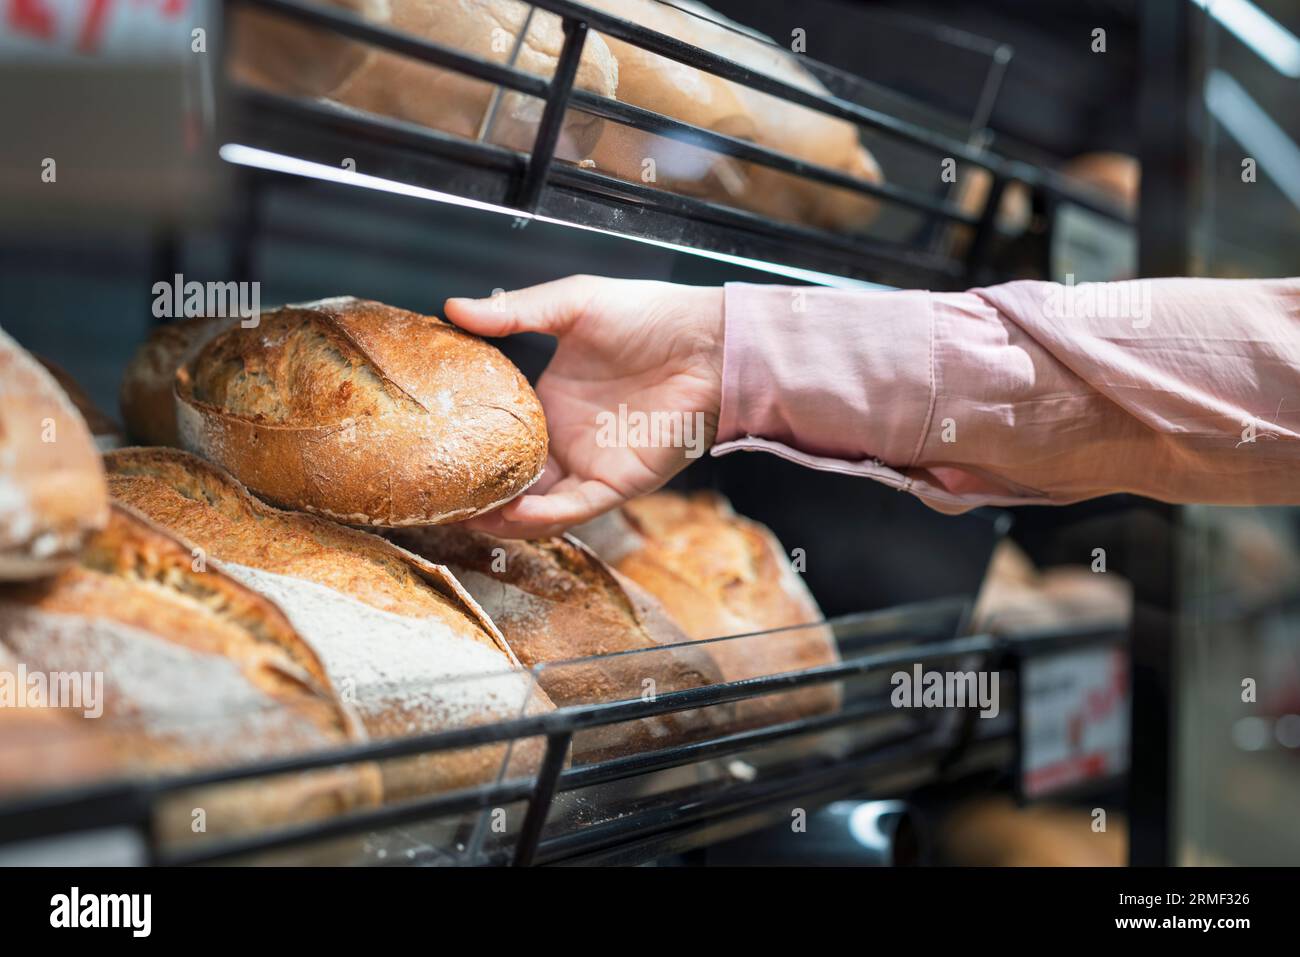 Close-up of man picking bread in bakery section of supermarket Stock Photo